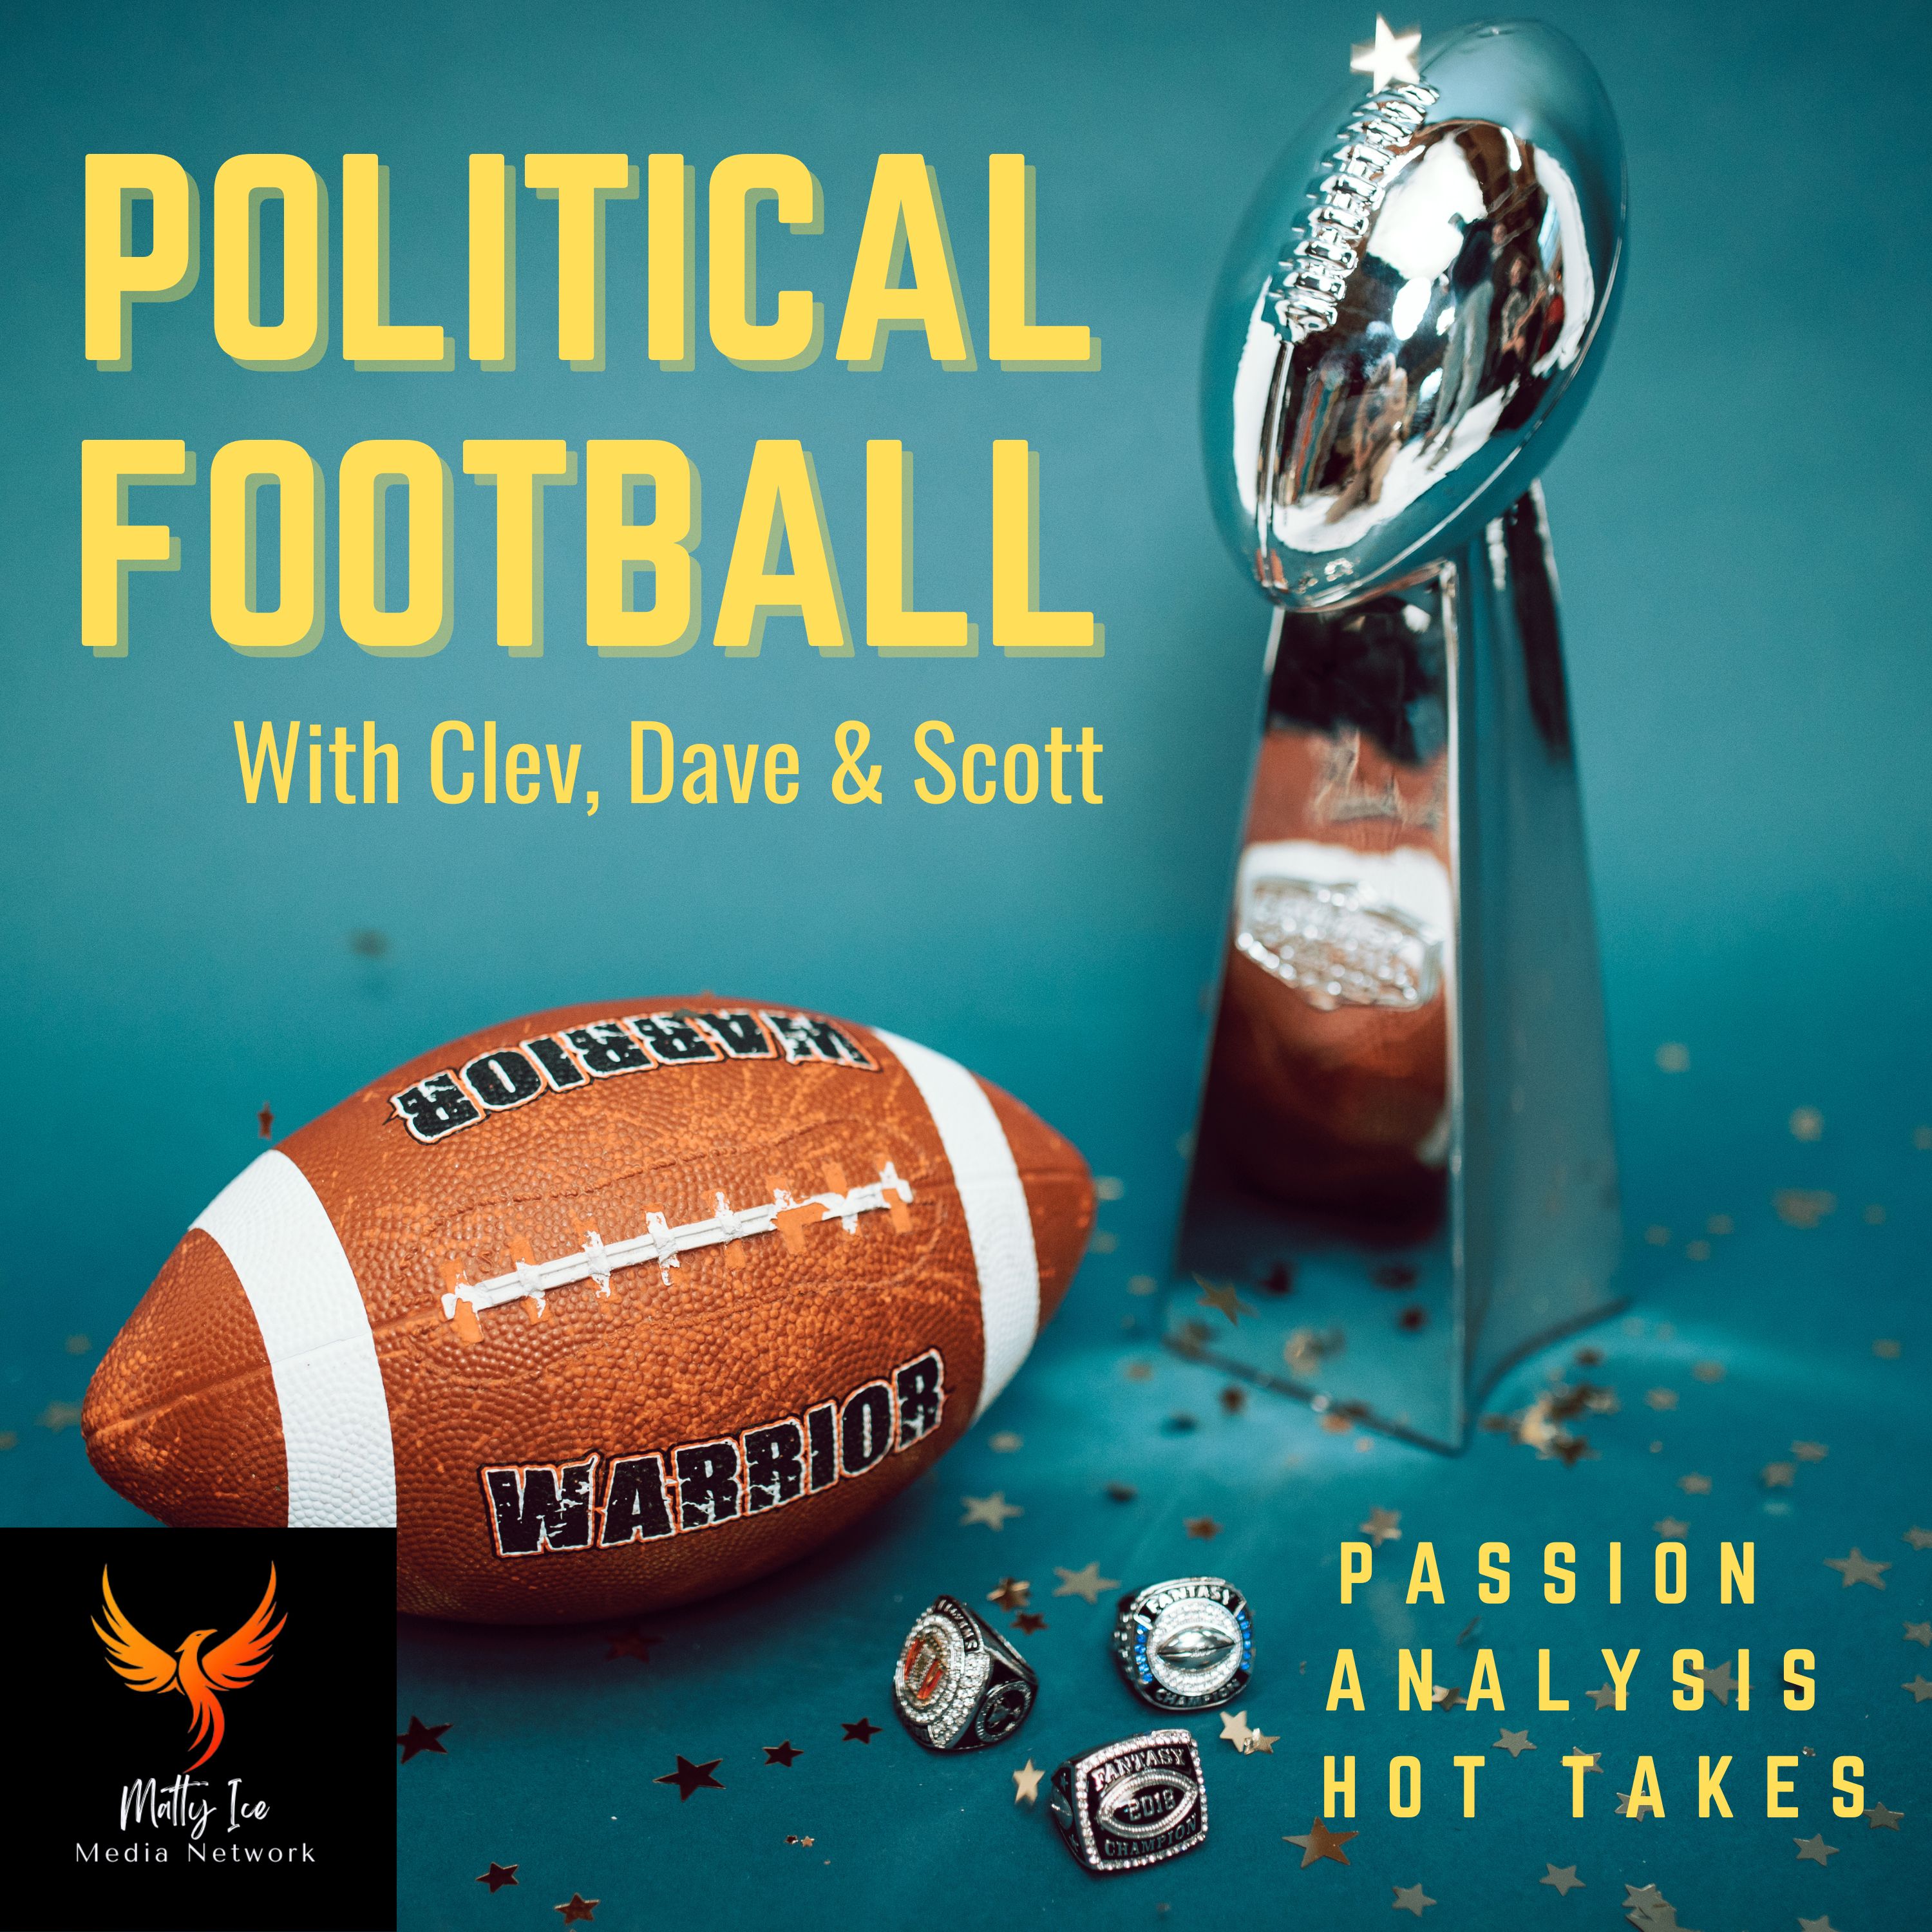 Artwork for Political Football with Clev, Dave & Scott